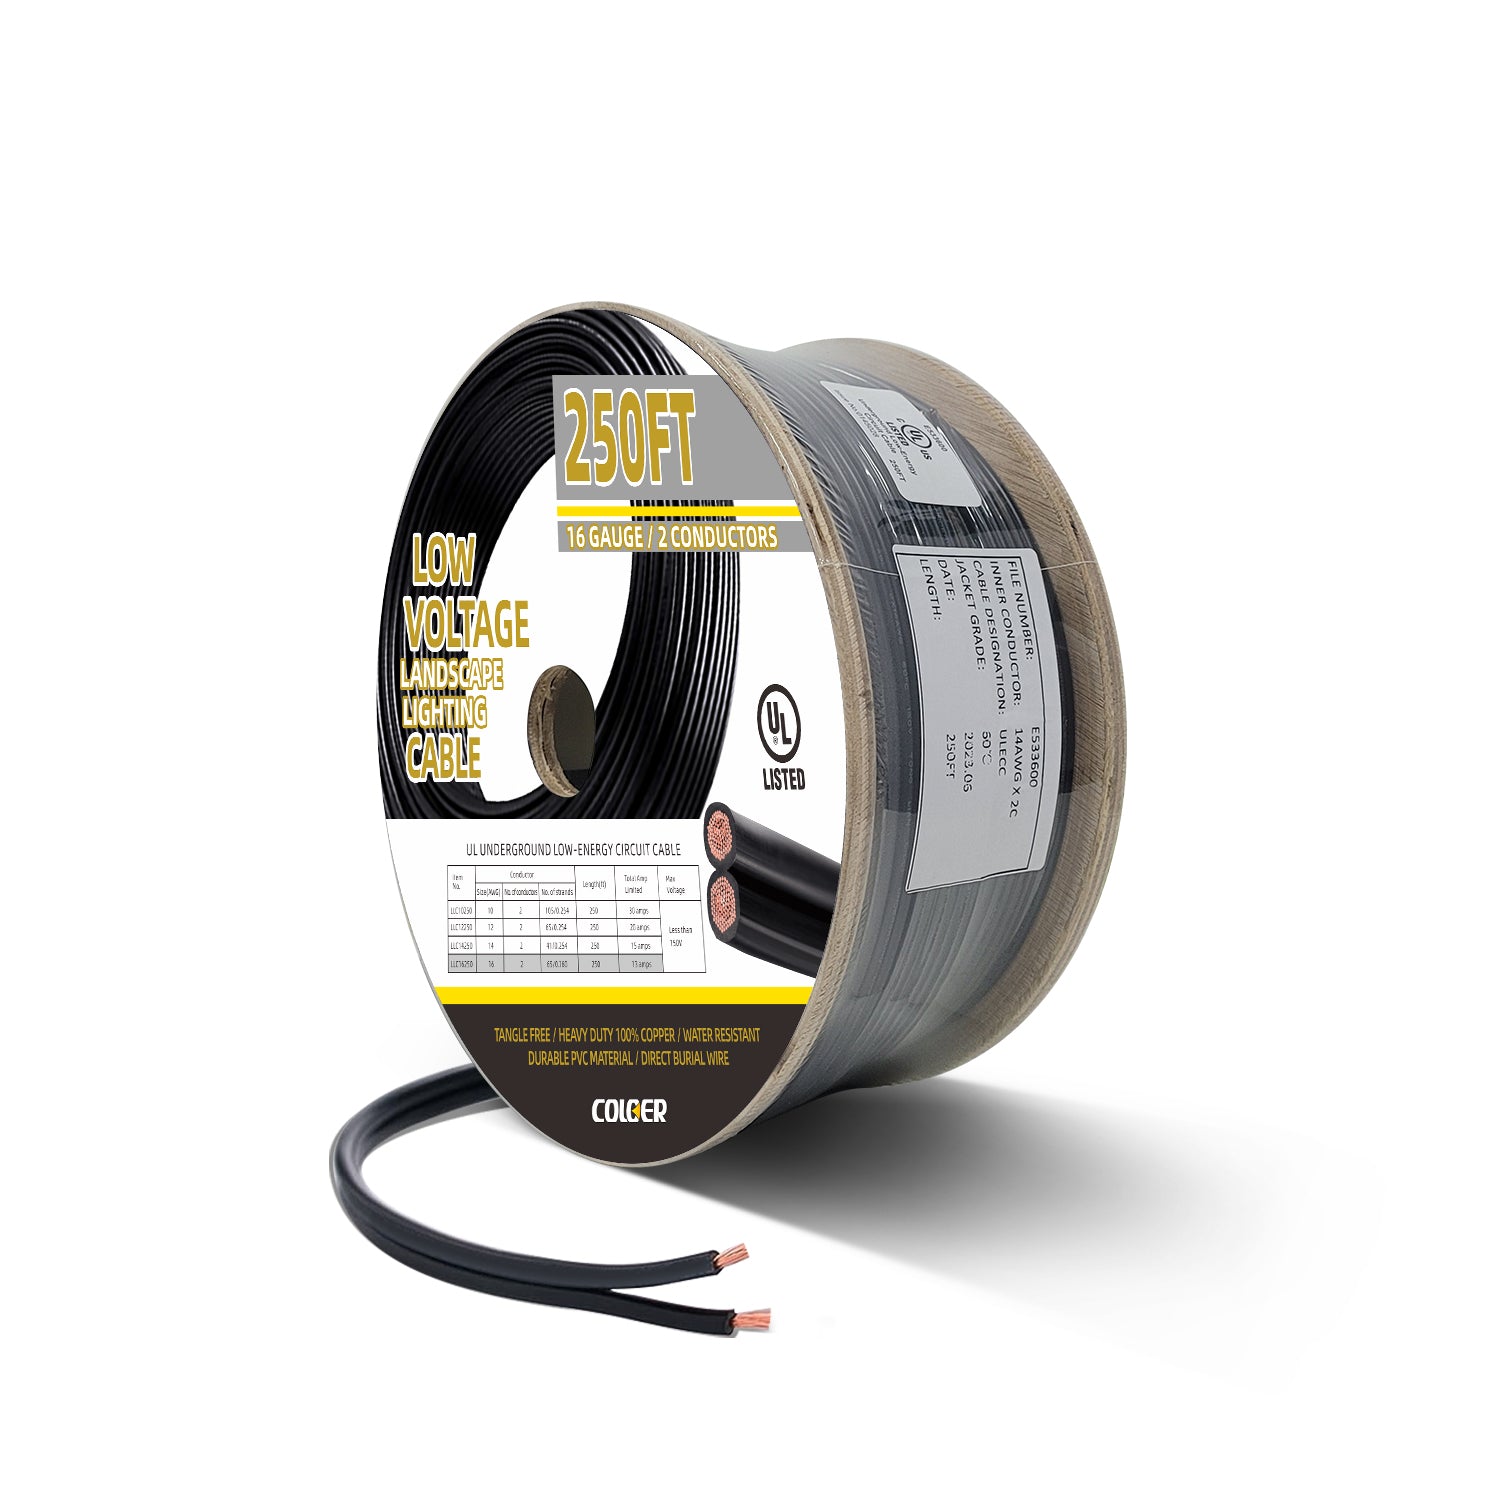 16 Gauge Low Voltage Landscape Wire | 2 Conductor Outdoor Landscape Lighting Direct Burial Electrical Cable COW1104B